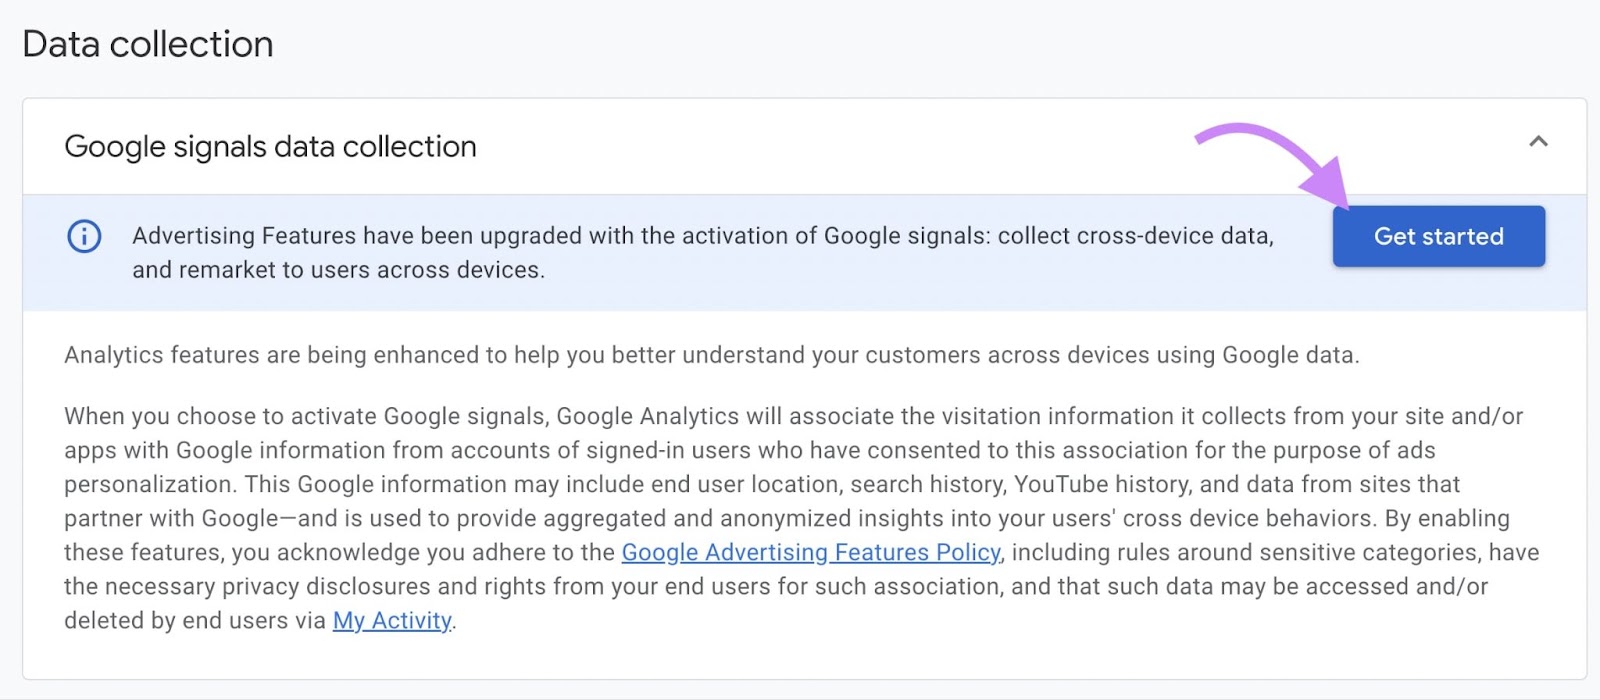 ‘Get Started’ button selected under "Data collection" screen